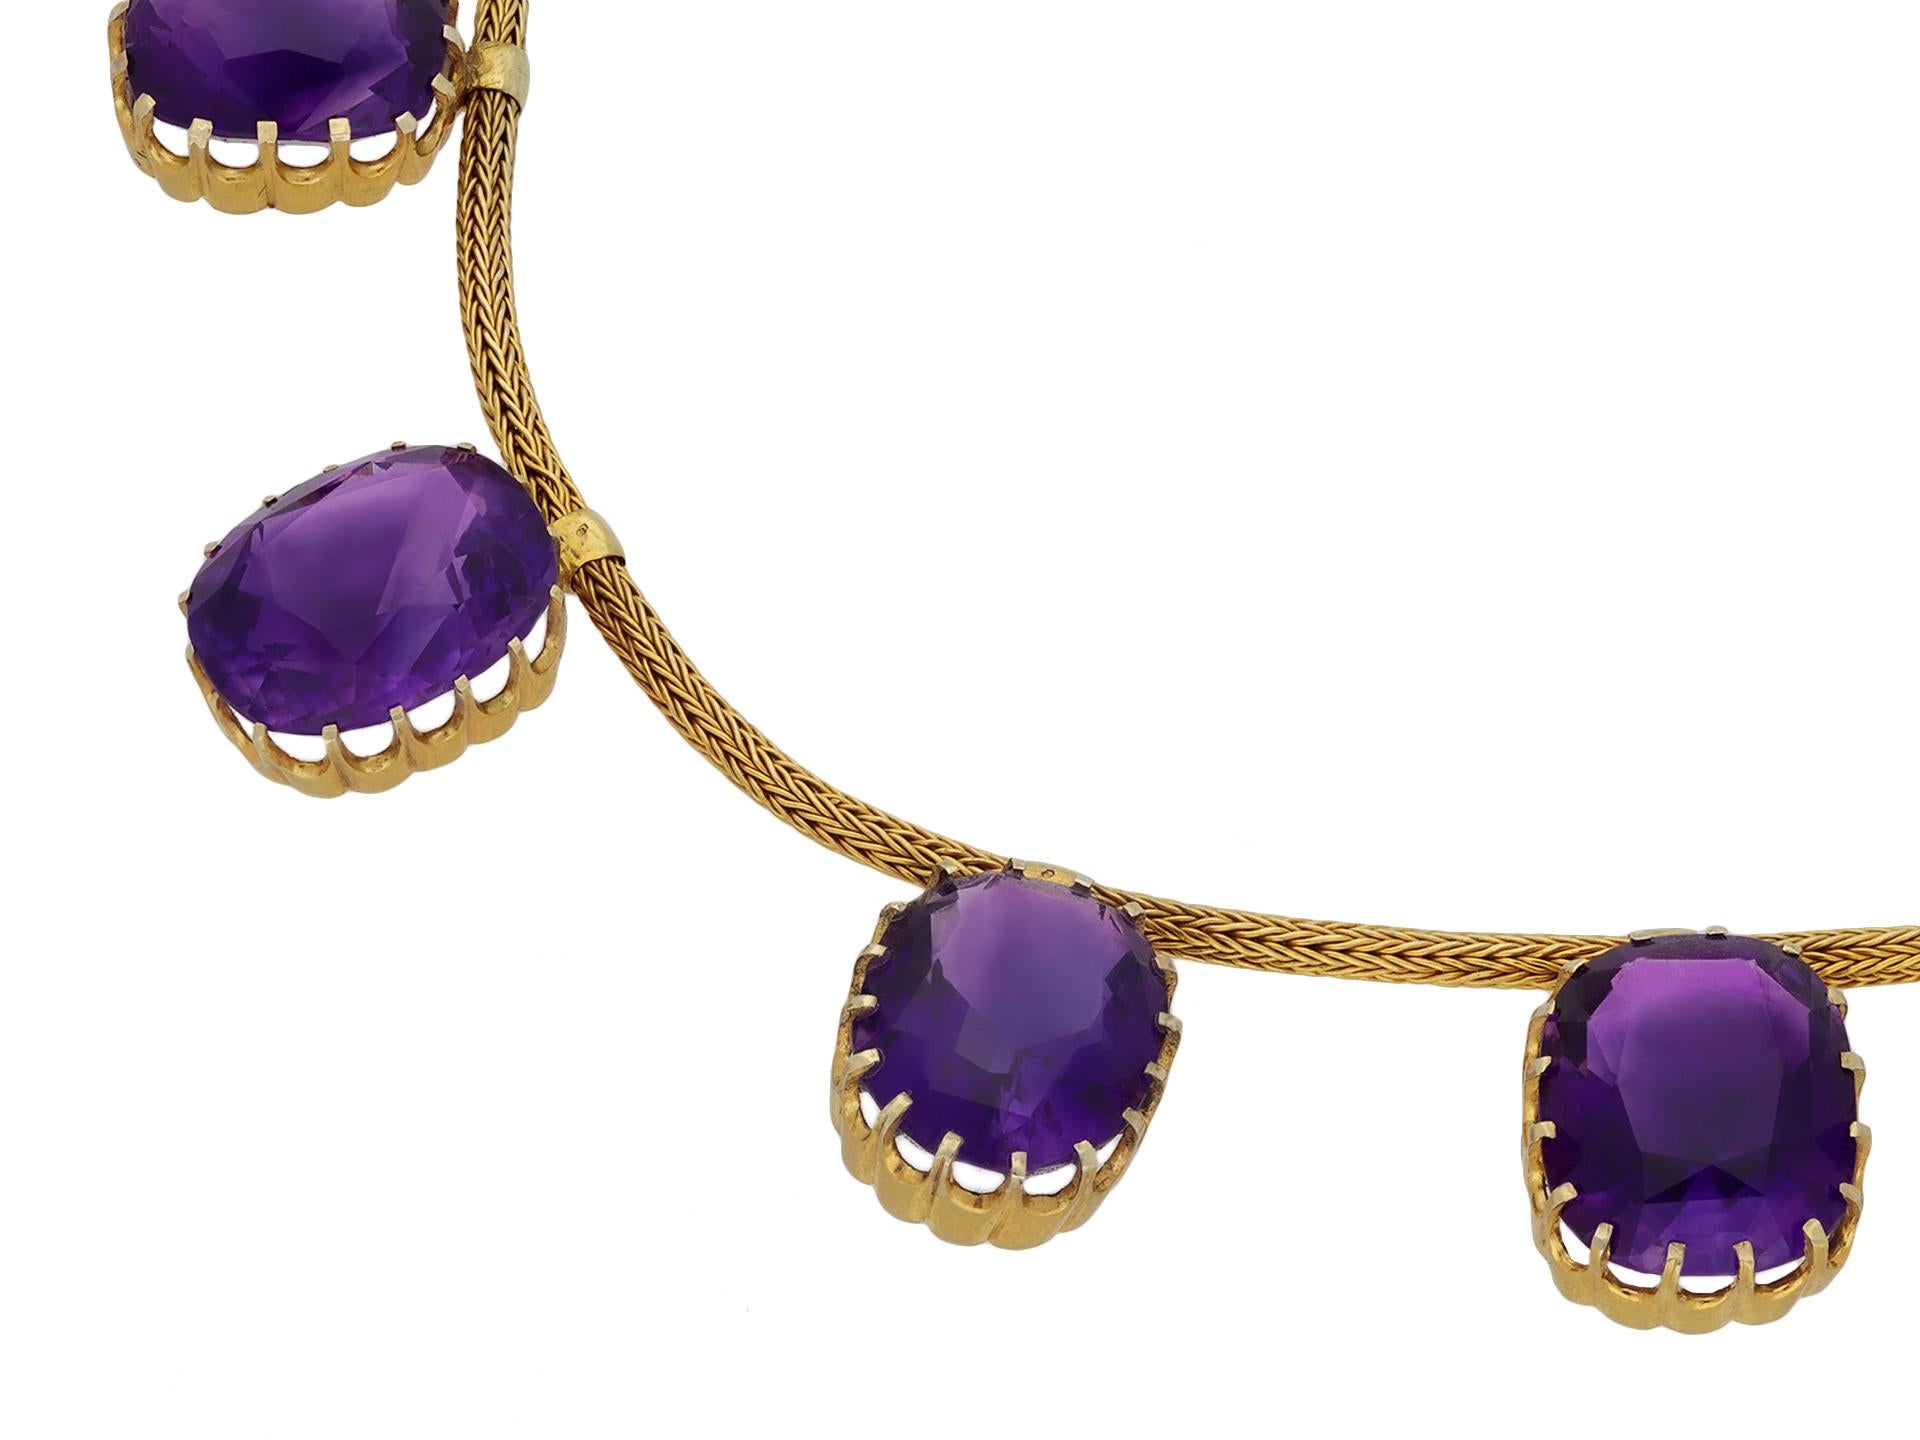 Antique amethyst necklace. A yellow gold necklace, set with eleven cushion shape double brilliant cut natural amethyst in open back claw settings with an approximate combined weight of 75.00 carats, with elegant curved fluted claws to an intricate